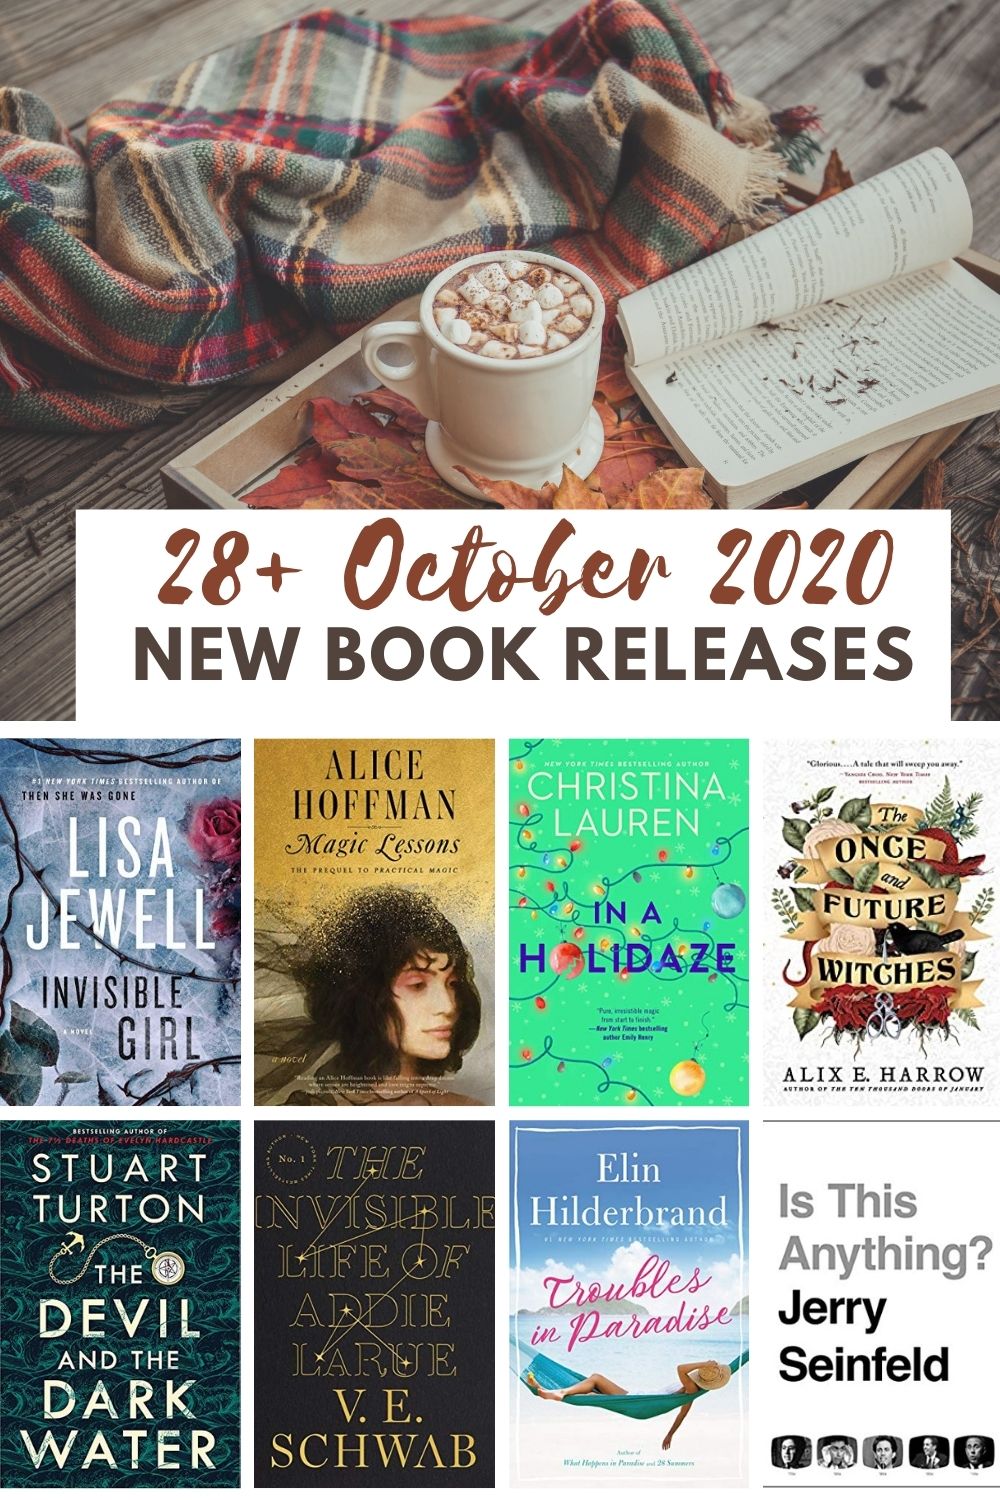 Incredible books coming out October 2020. New releases from debut authors and old favorites!